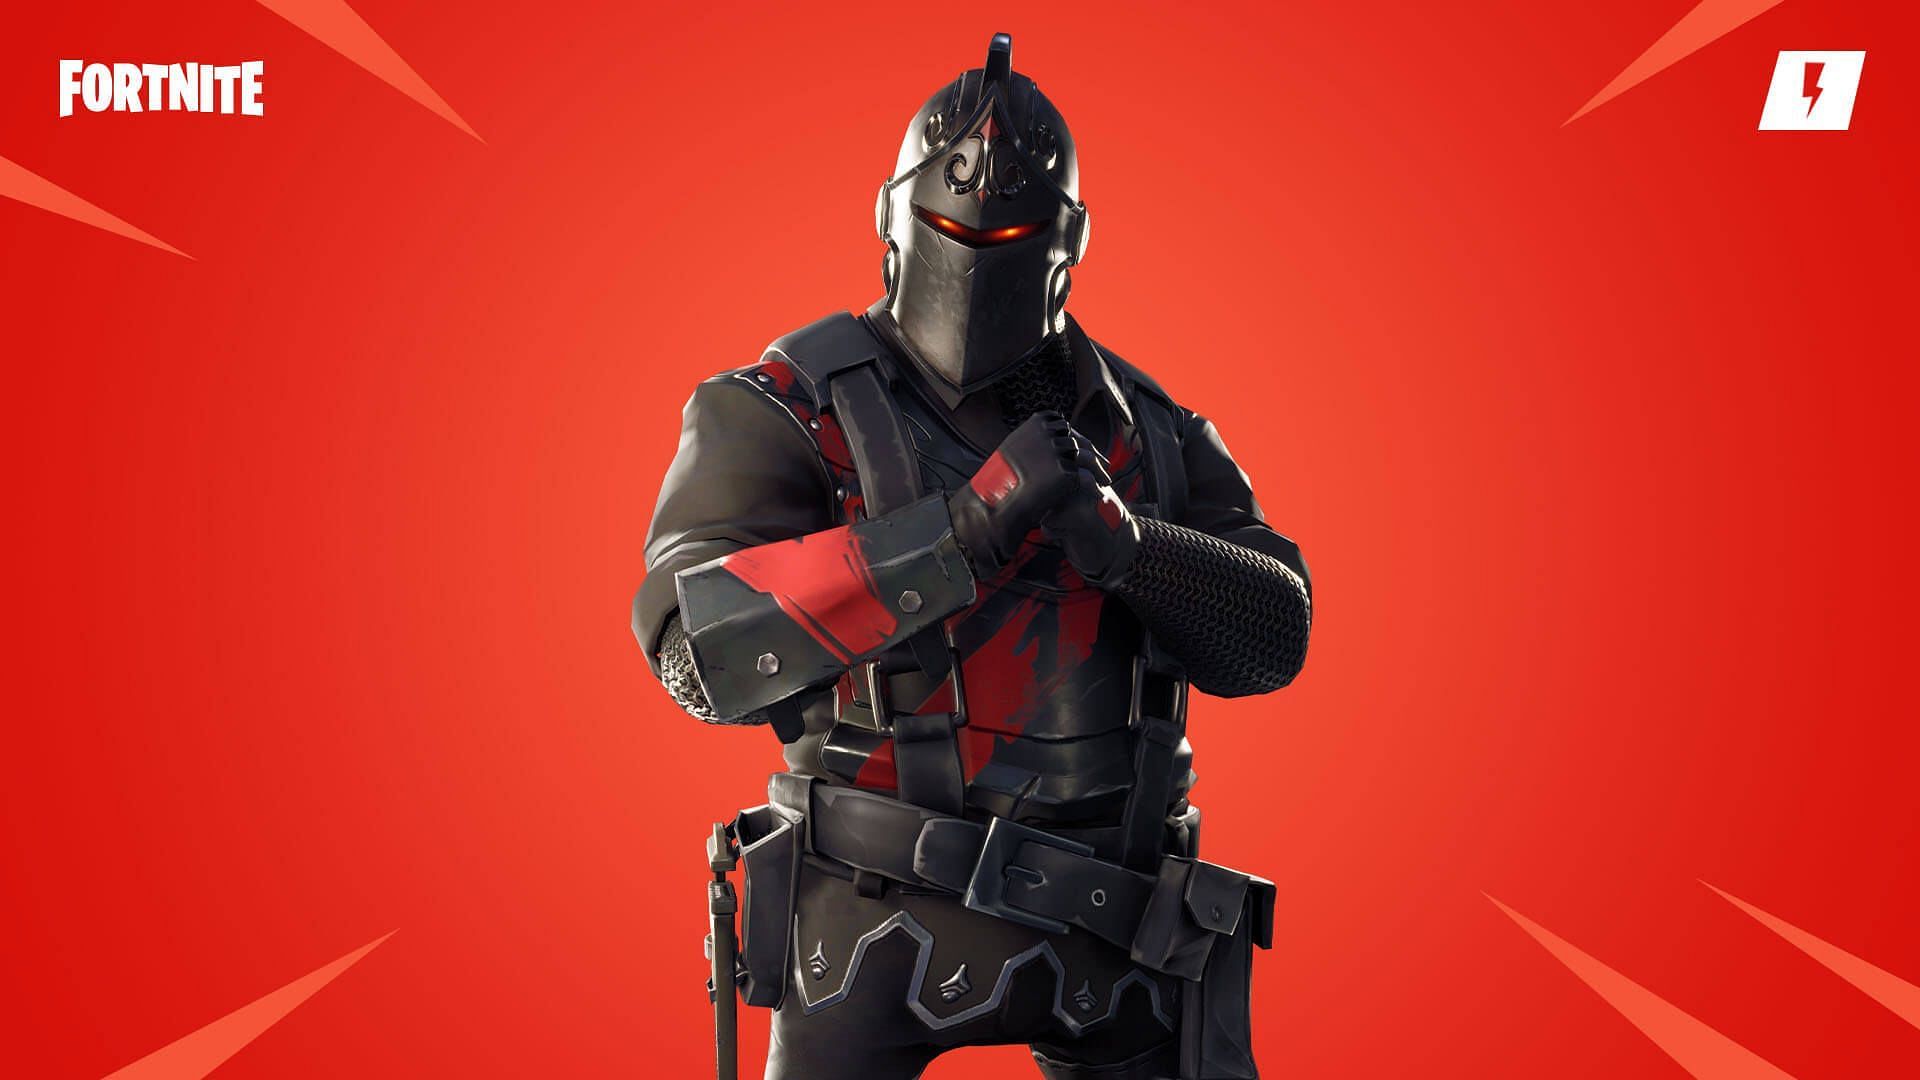 The Black Knight is the rarest Fortnite skin (Image via Epic Games)